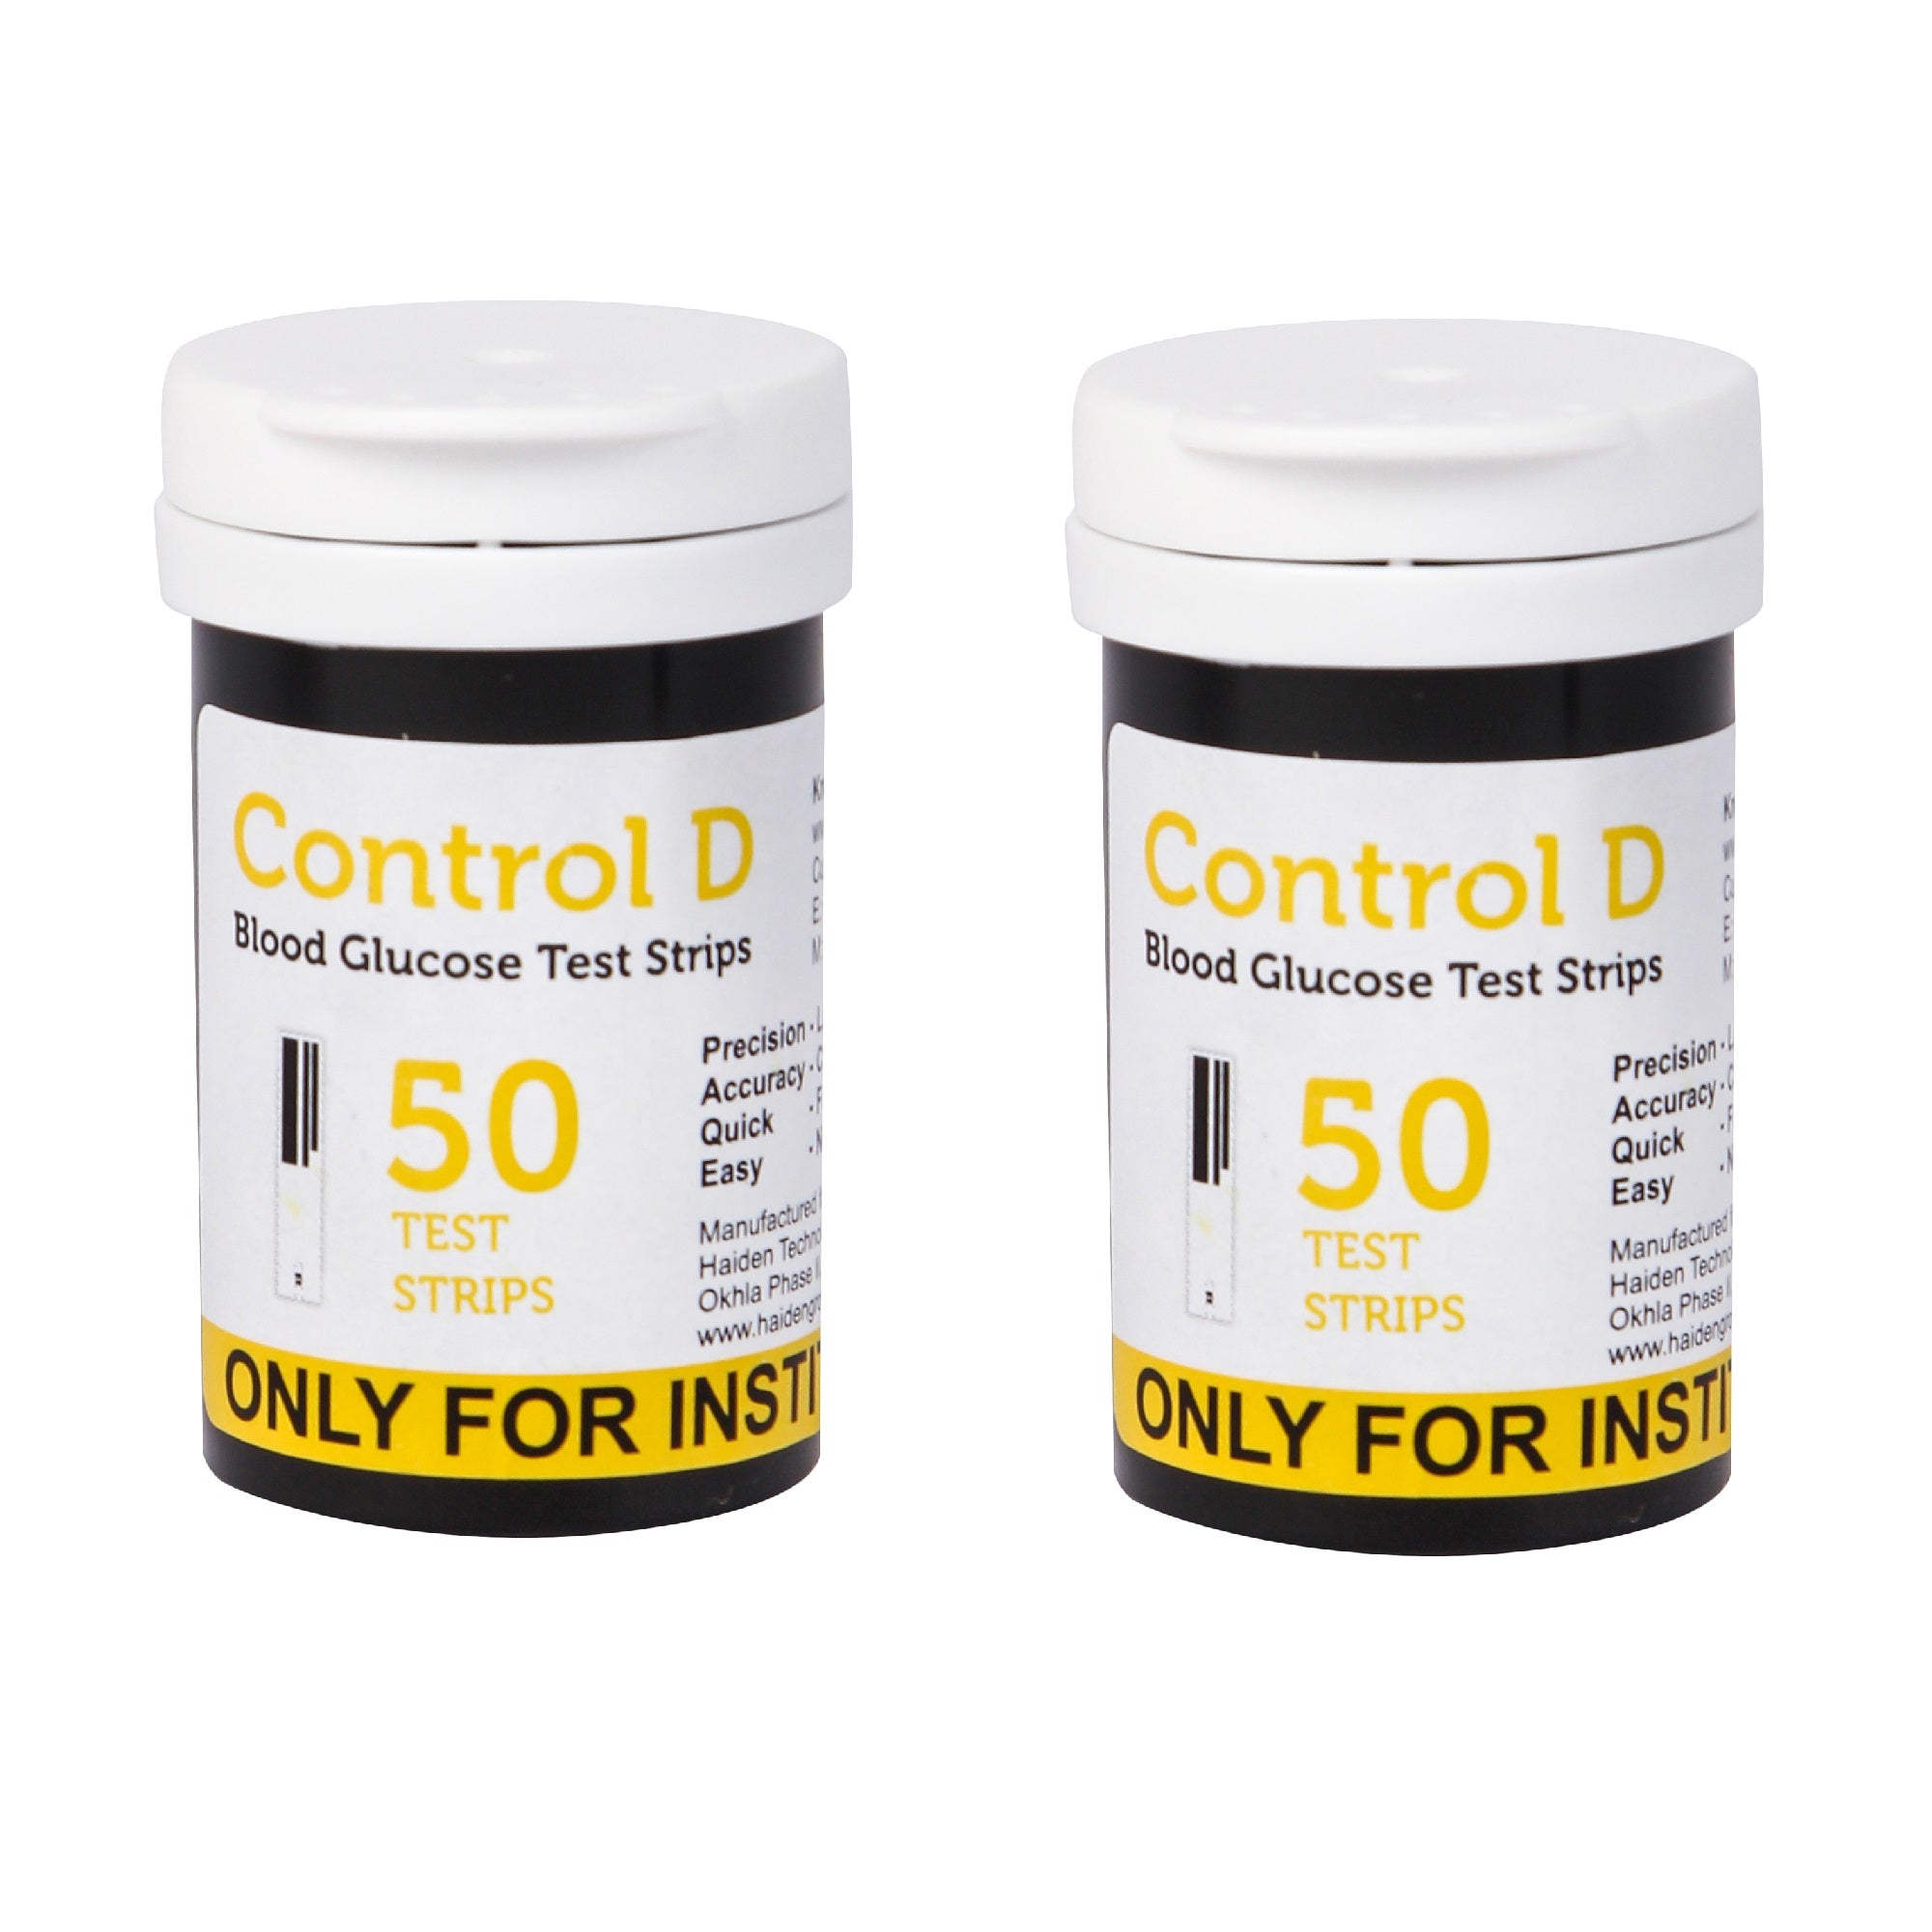 Control D 100 Test Strips for Hospitals & Institutions